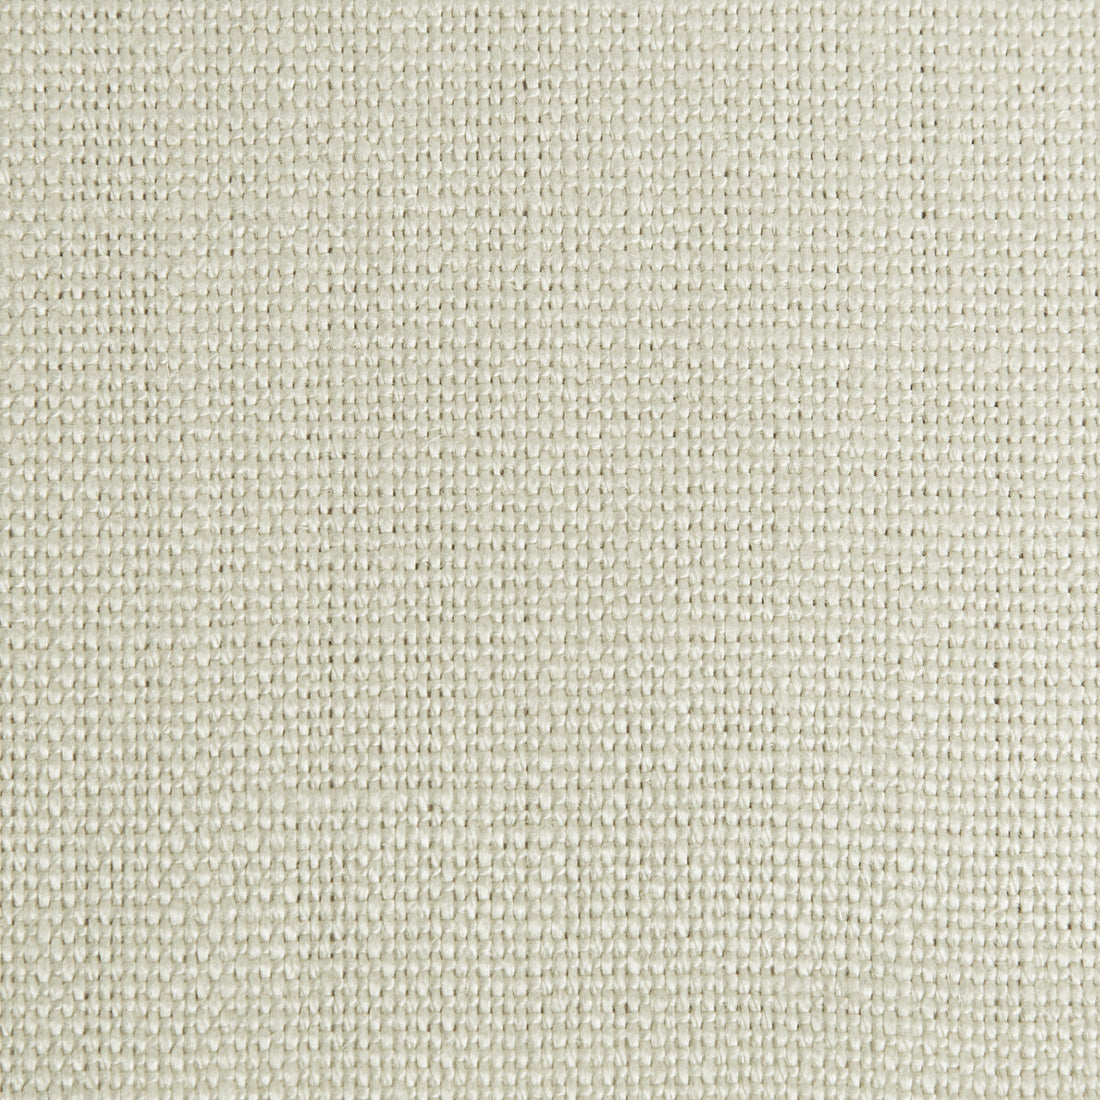 Stone Harbor fabric in moonlight color - pattern 27591.1101.0 - by Kravet Basics in the The Complete Linen IV collection